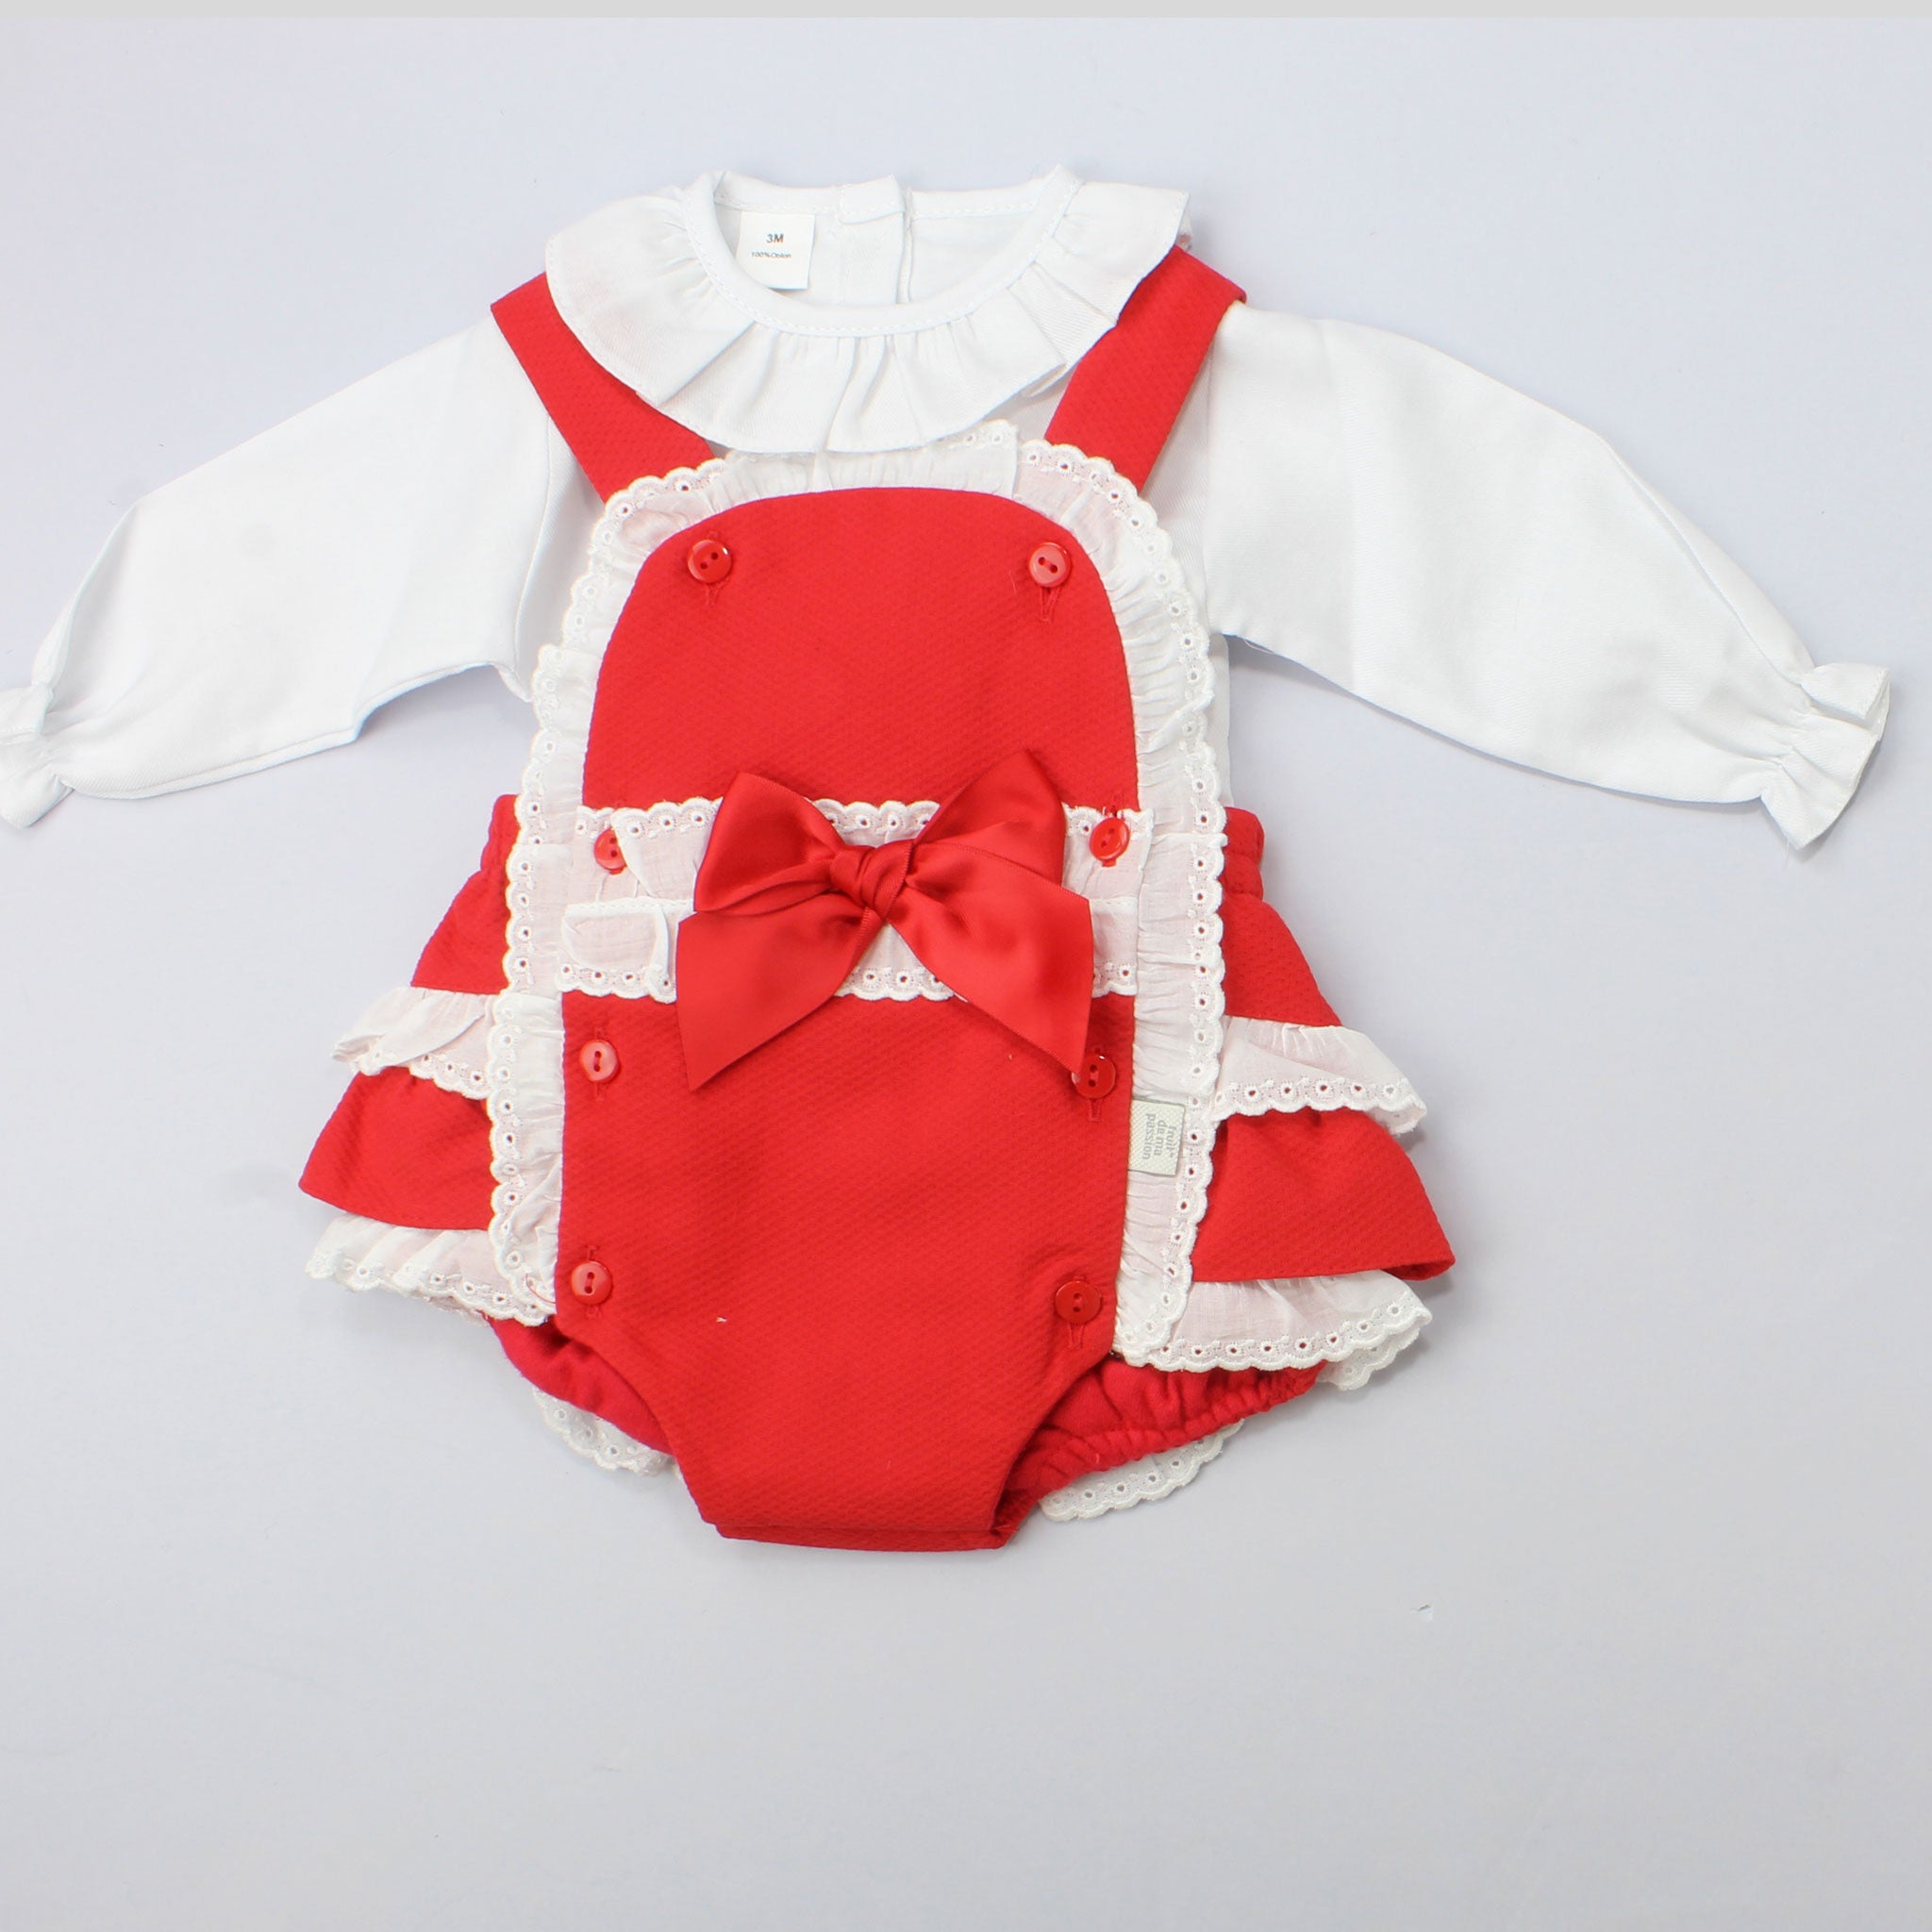 red and white two piece girls outfit